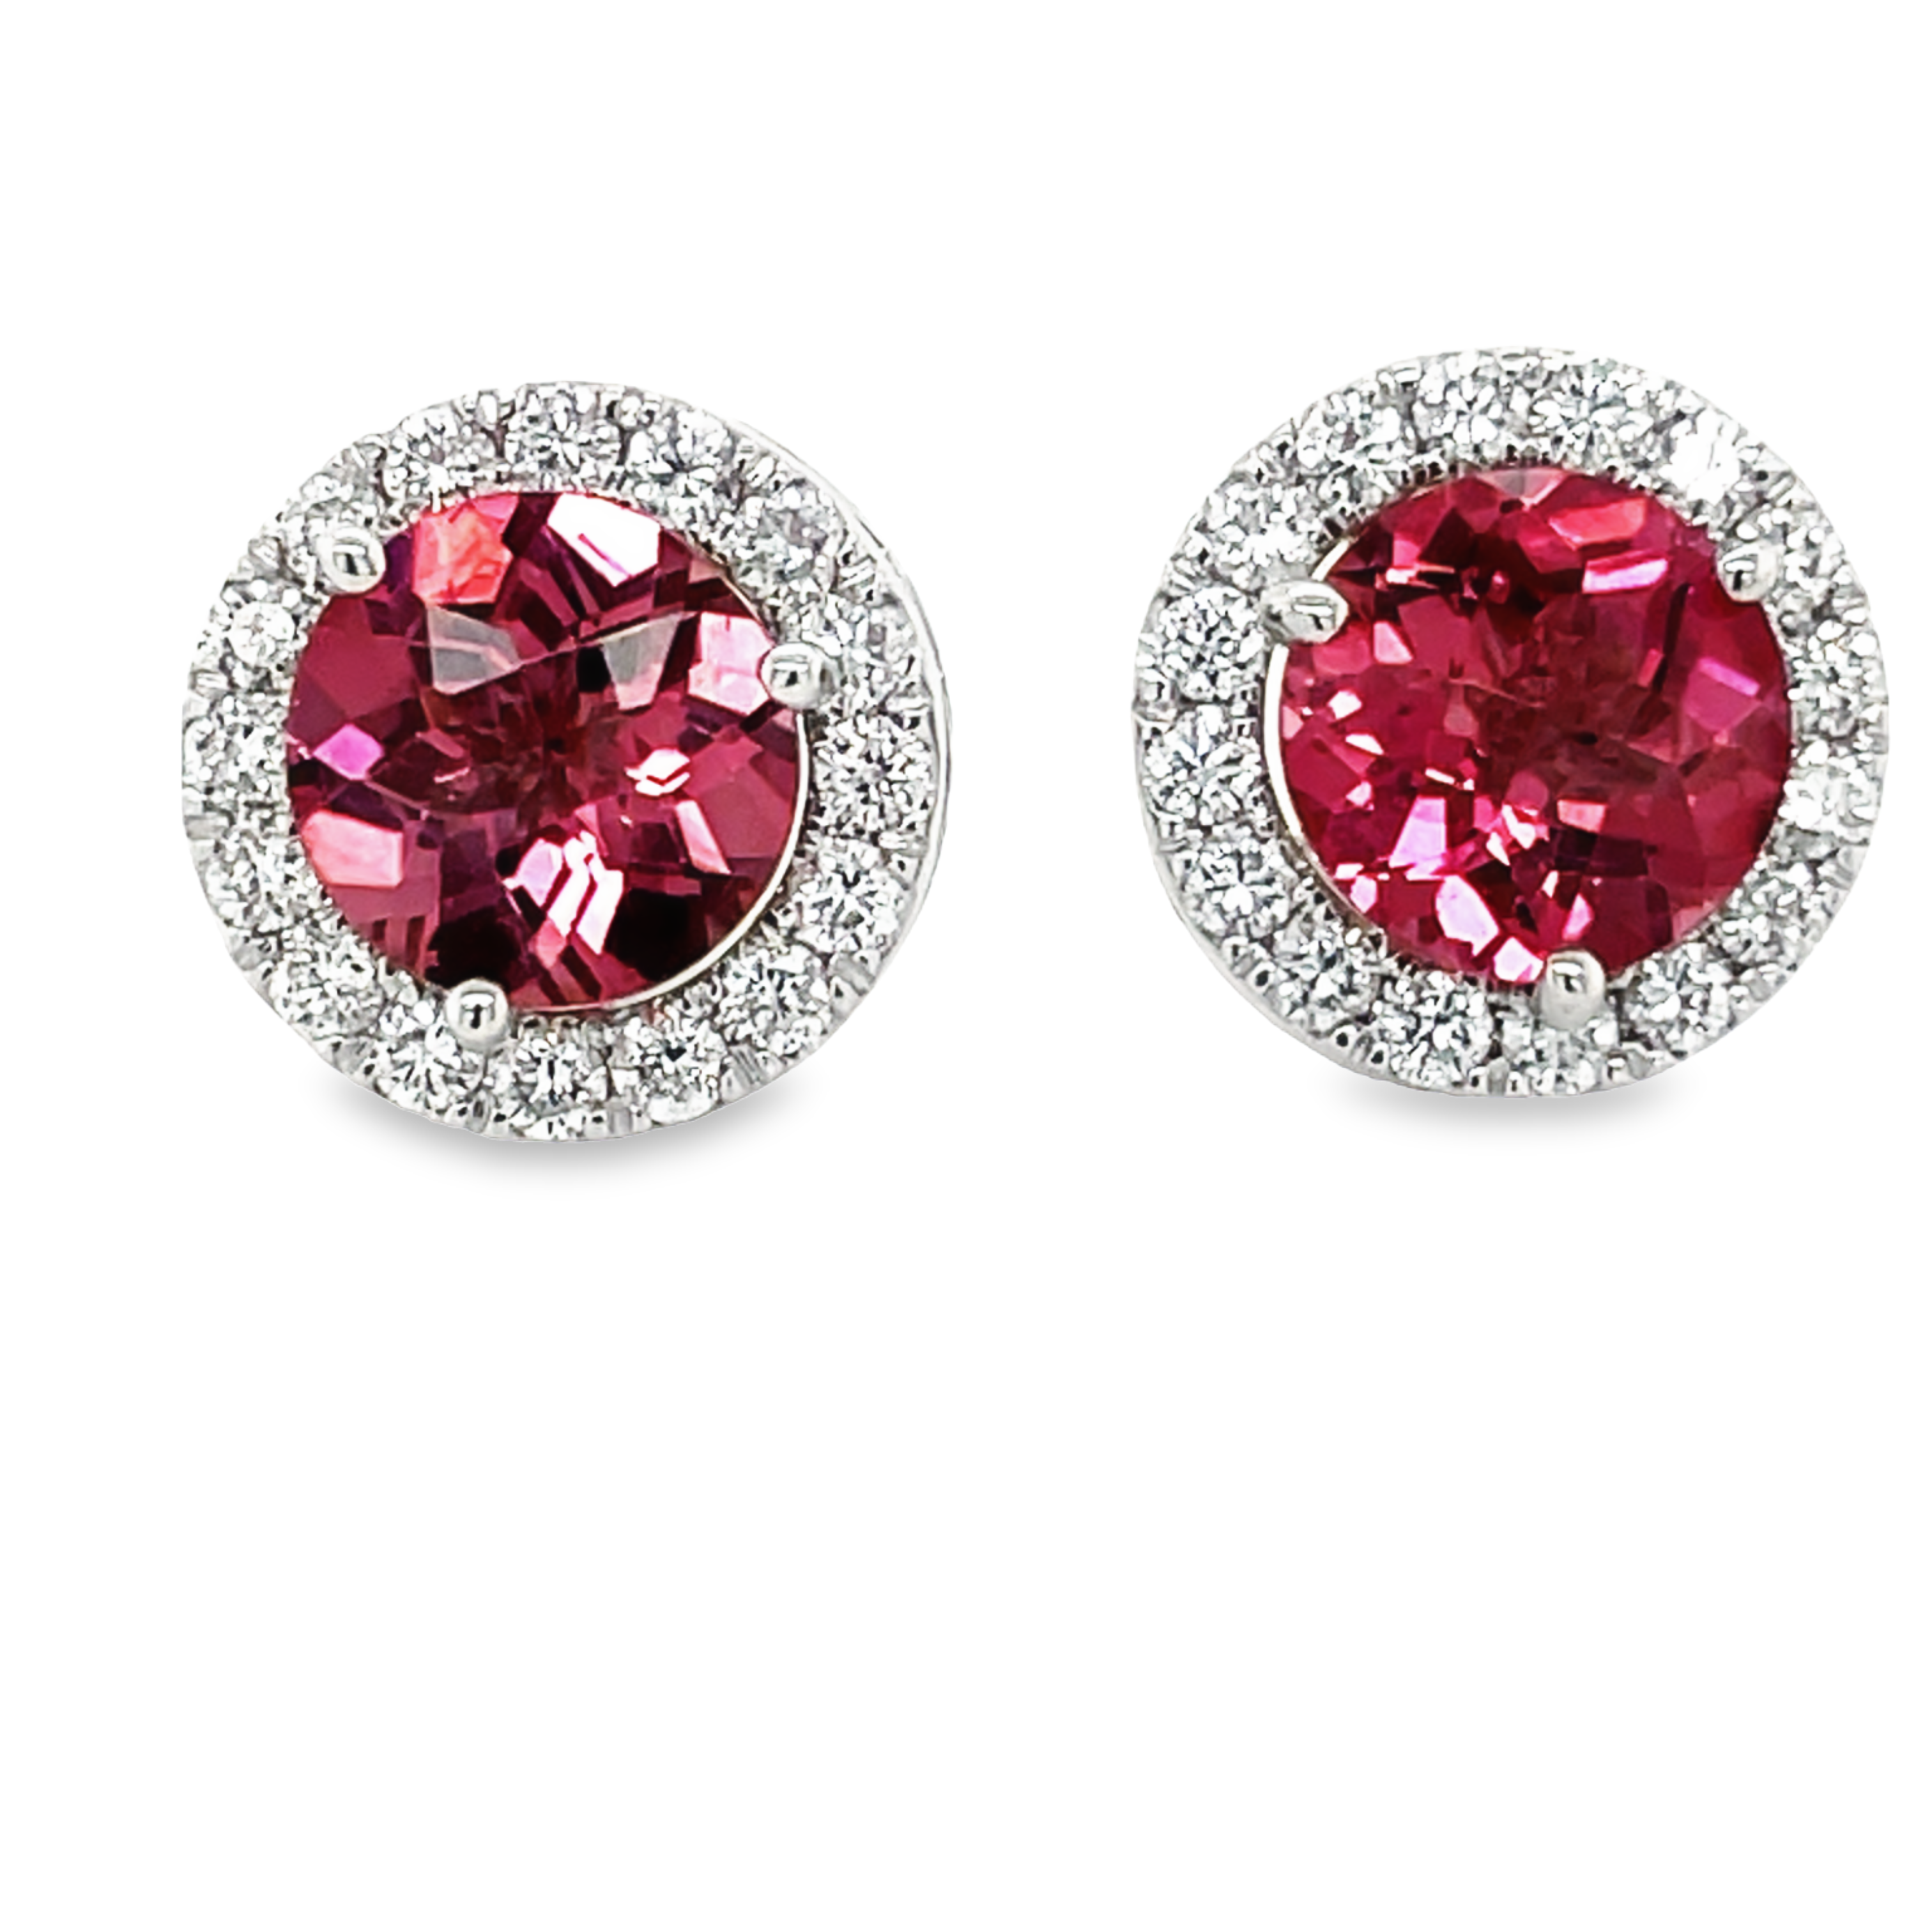 Two round rhodolite stud earrings   Set in 14k white gold   Secure friction backs  8.50 mm.  Great color  Diamond jackets are additional (150-800) 0.90 cts $2399.00.